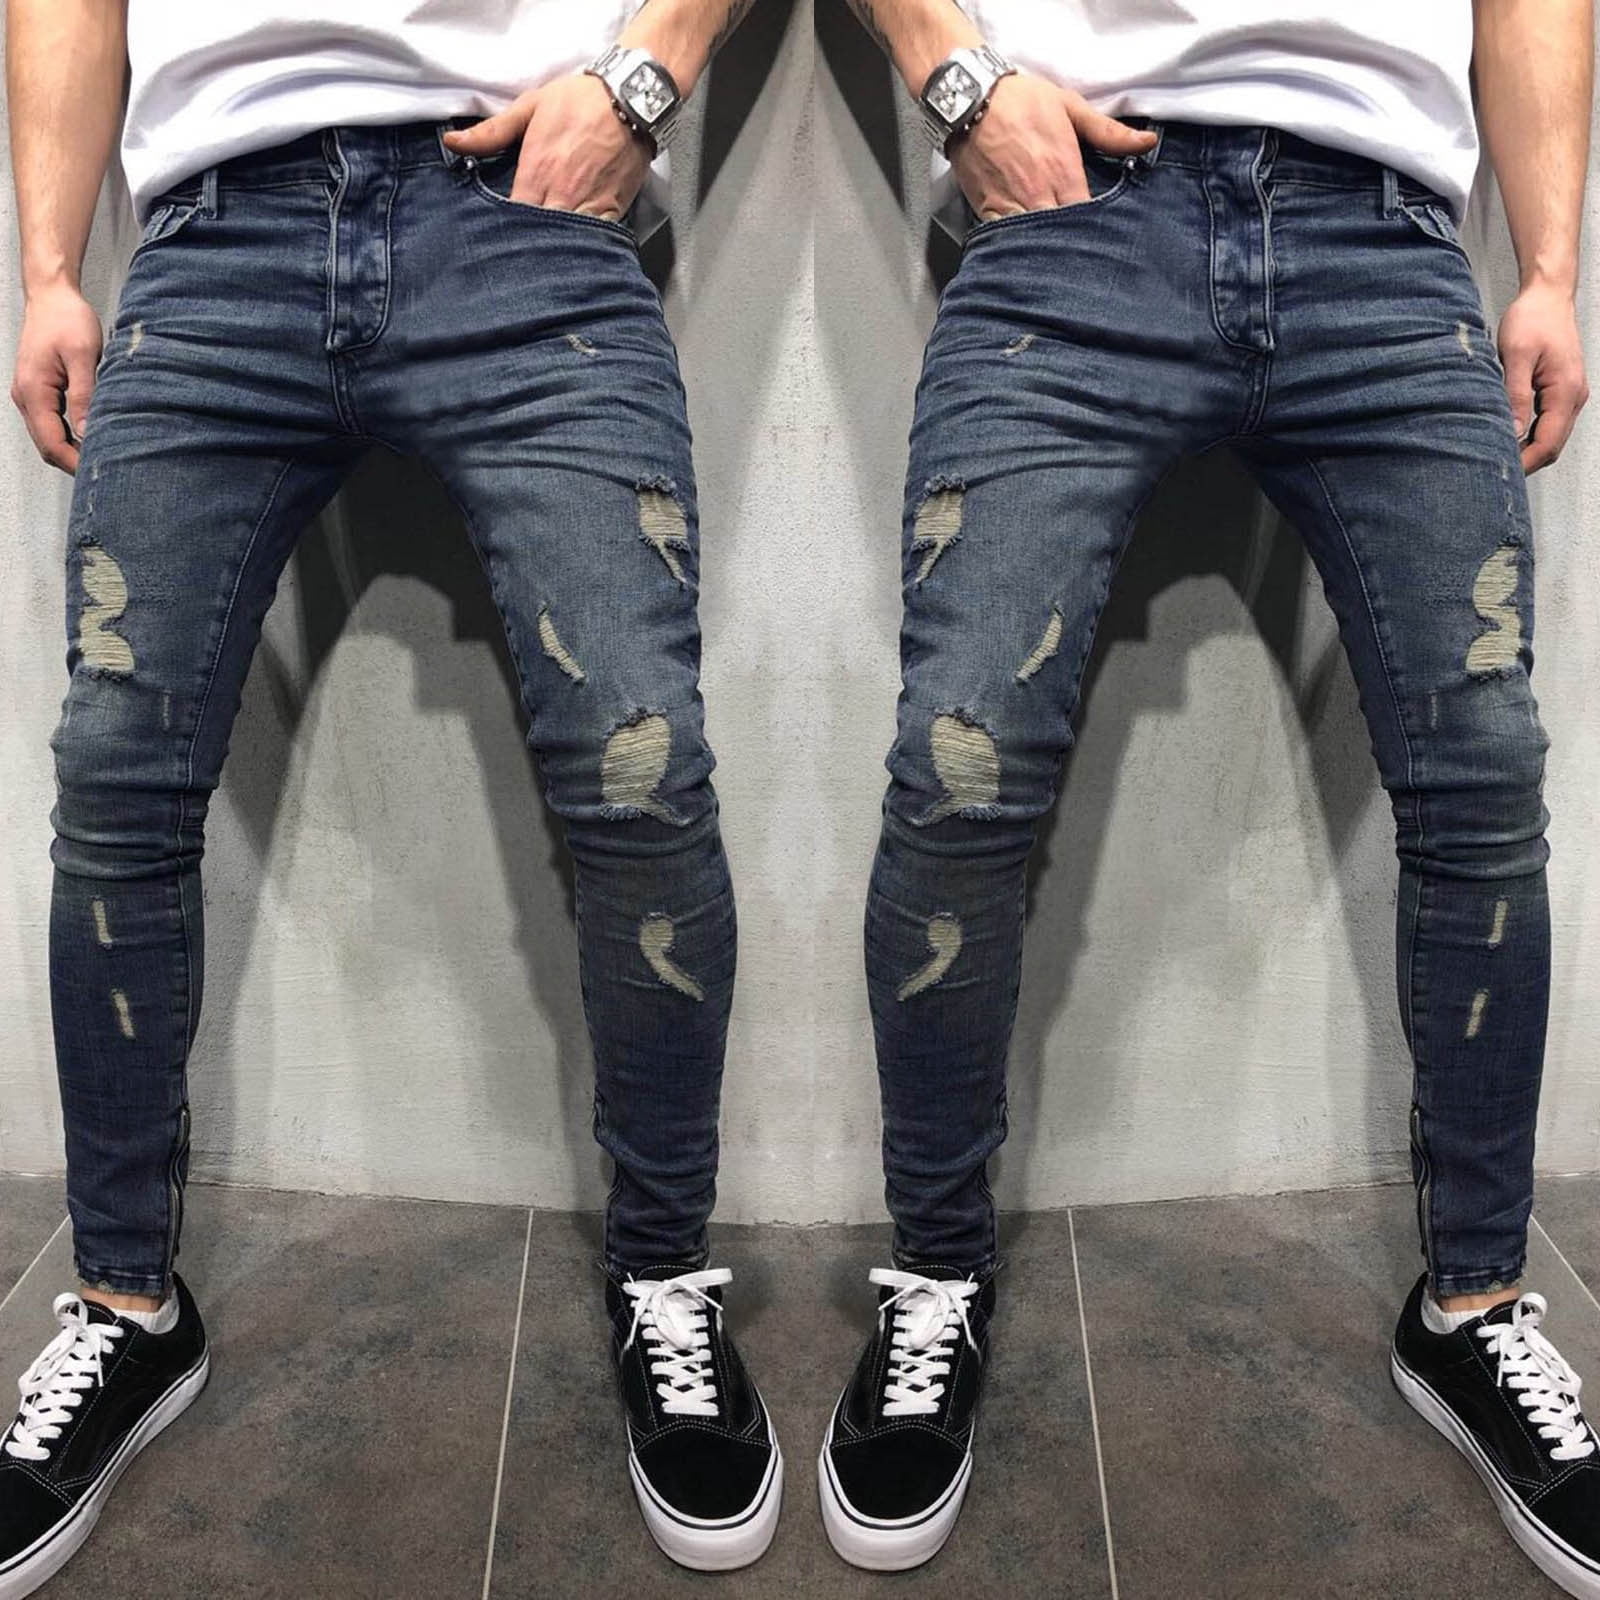 Mens Letter Print Ripped Skinny Jeans Slim Fit Stretchy Denim Pants Trousers